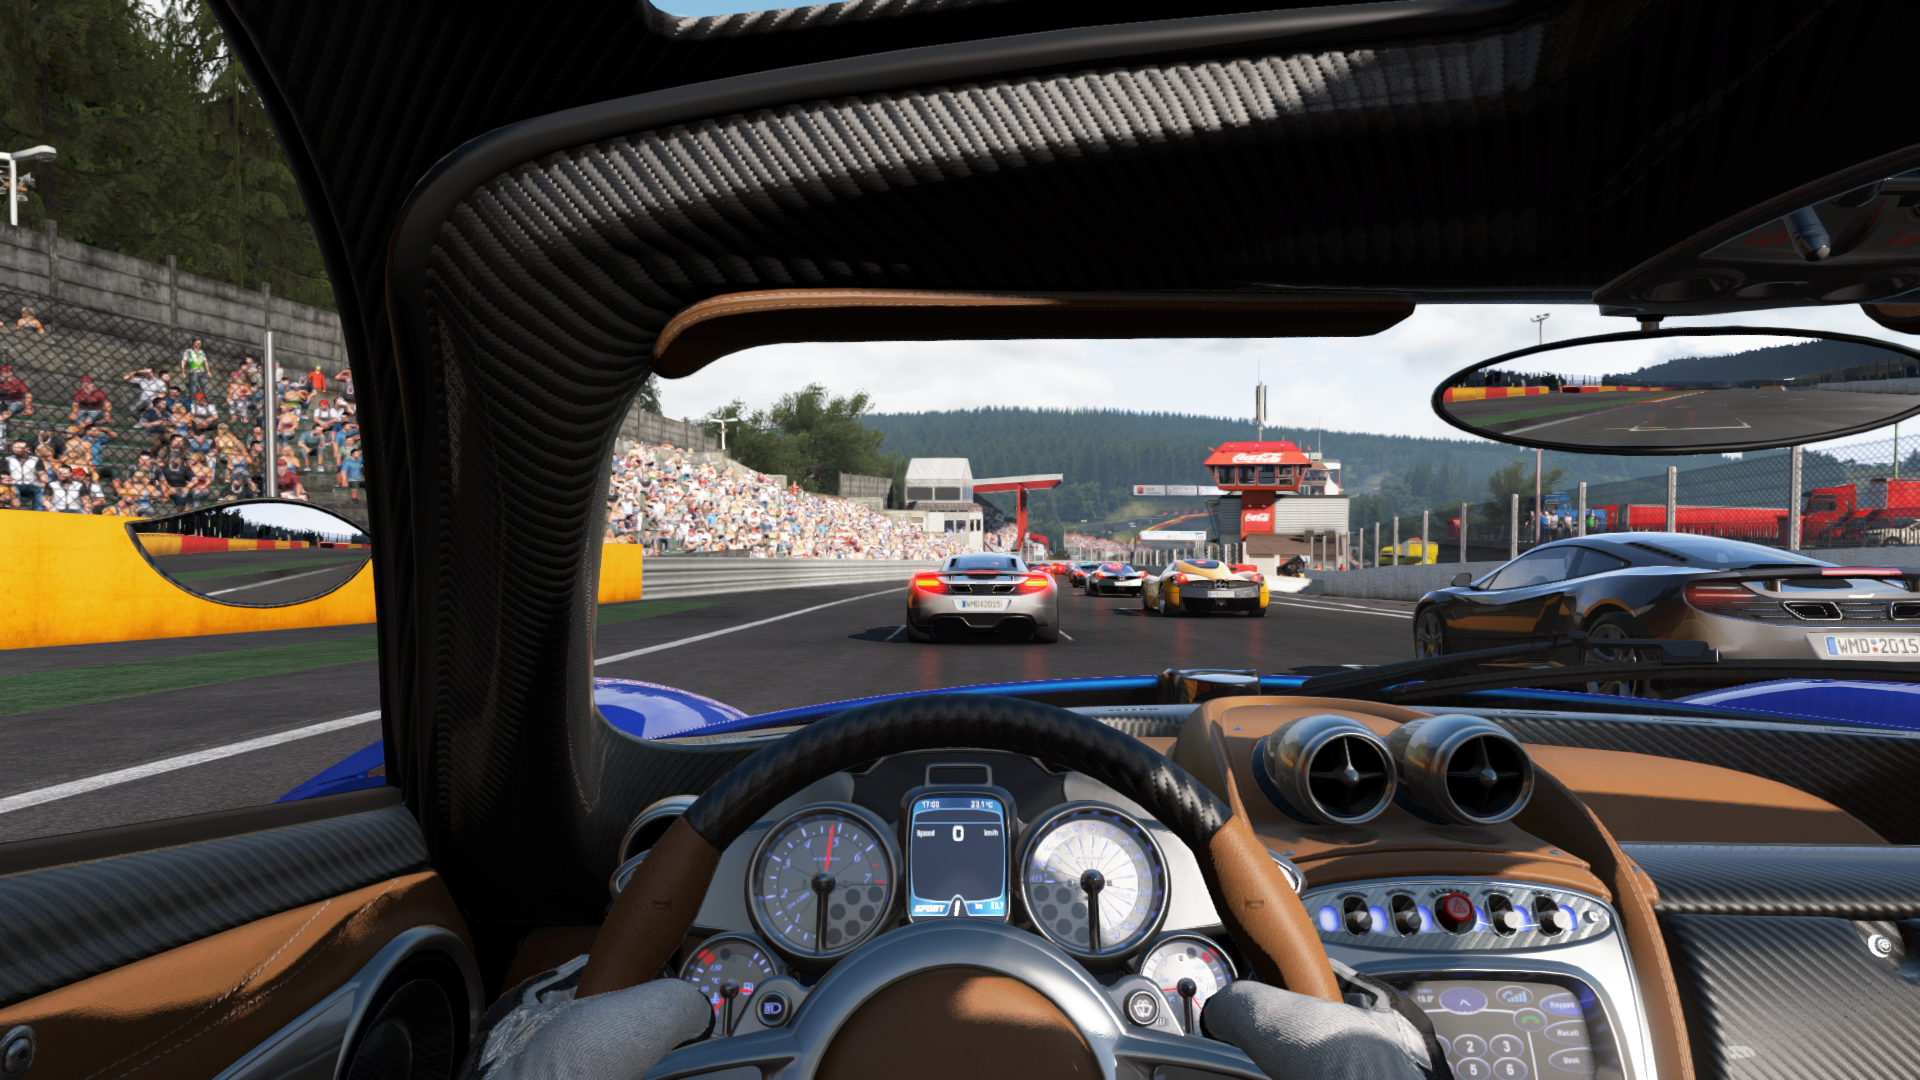 projectcars_201512202bssqn.png